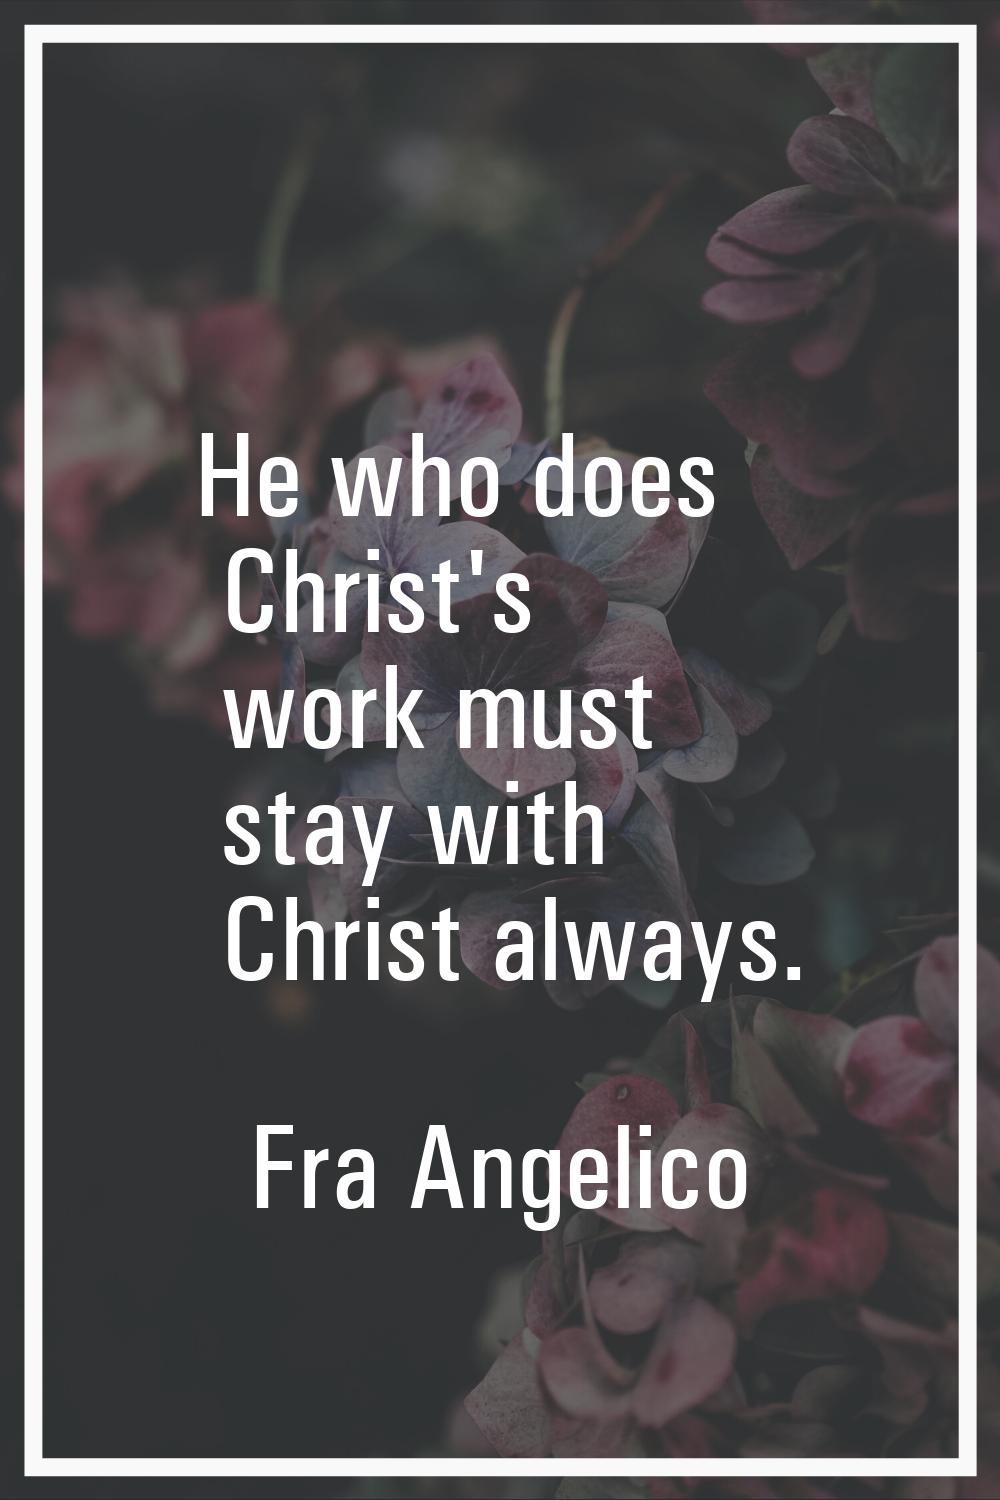 He who does Christ's work must stay with Christ always.